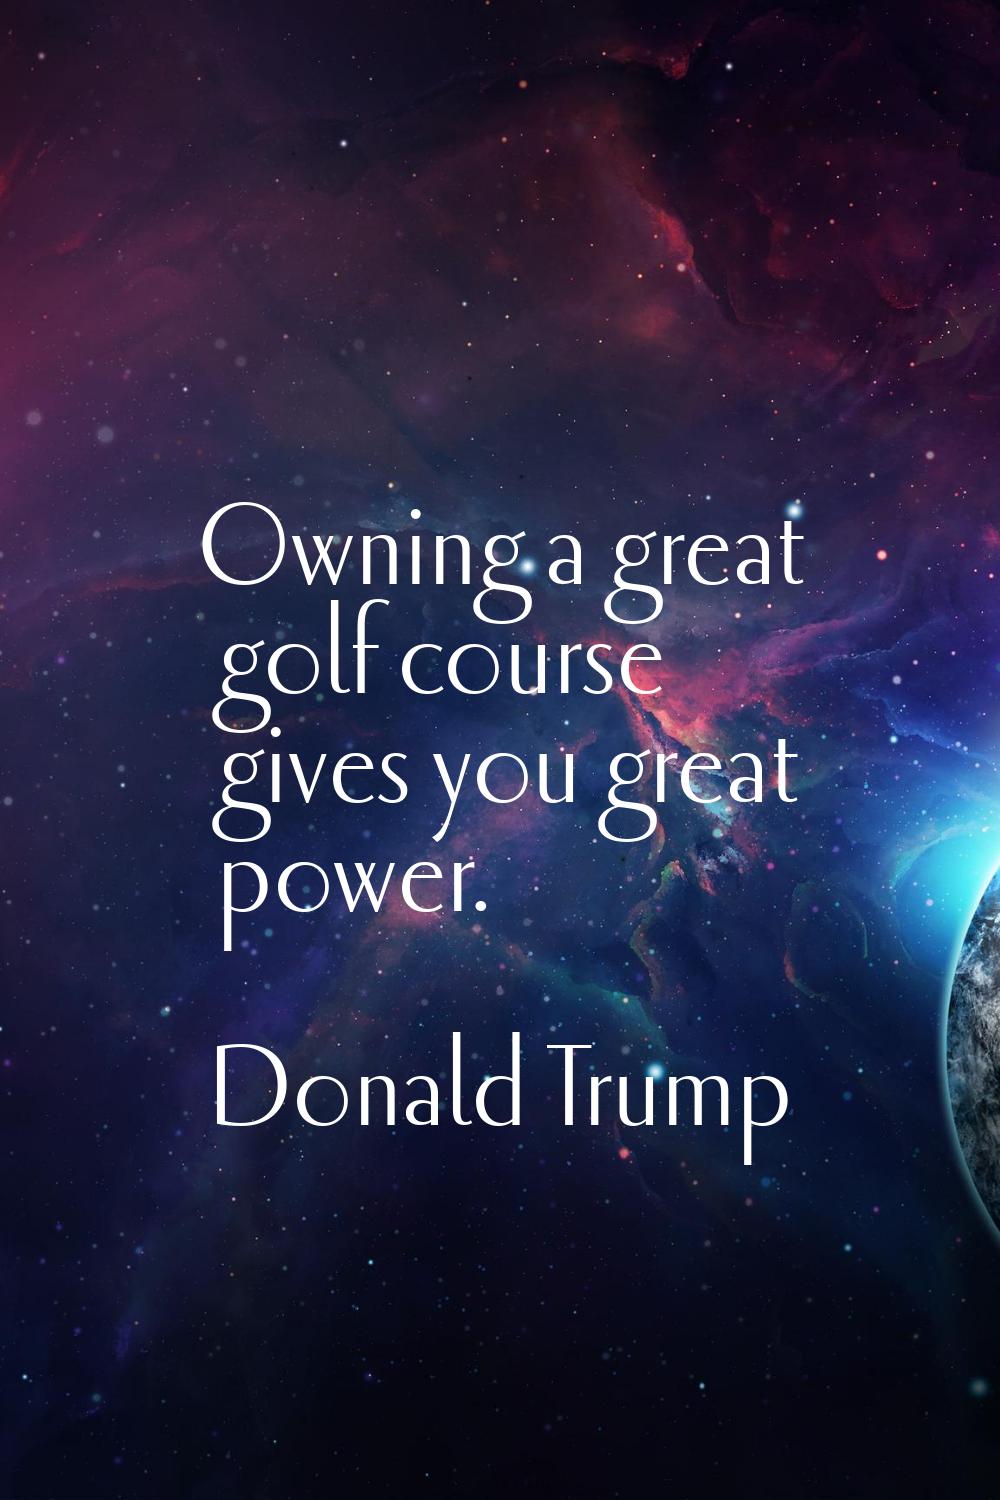 Owning a great golf course gives you great power.